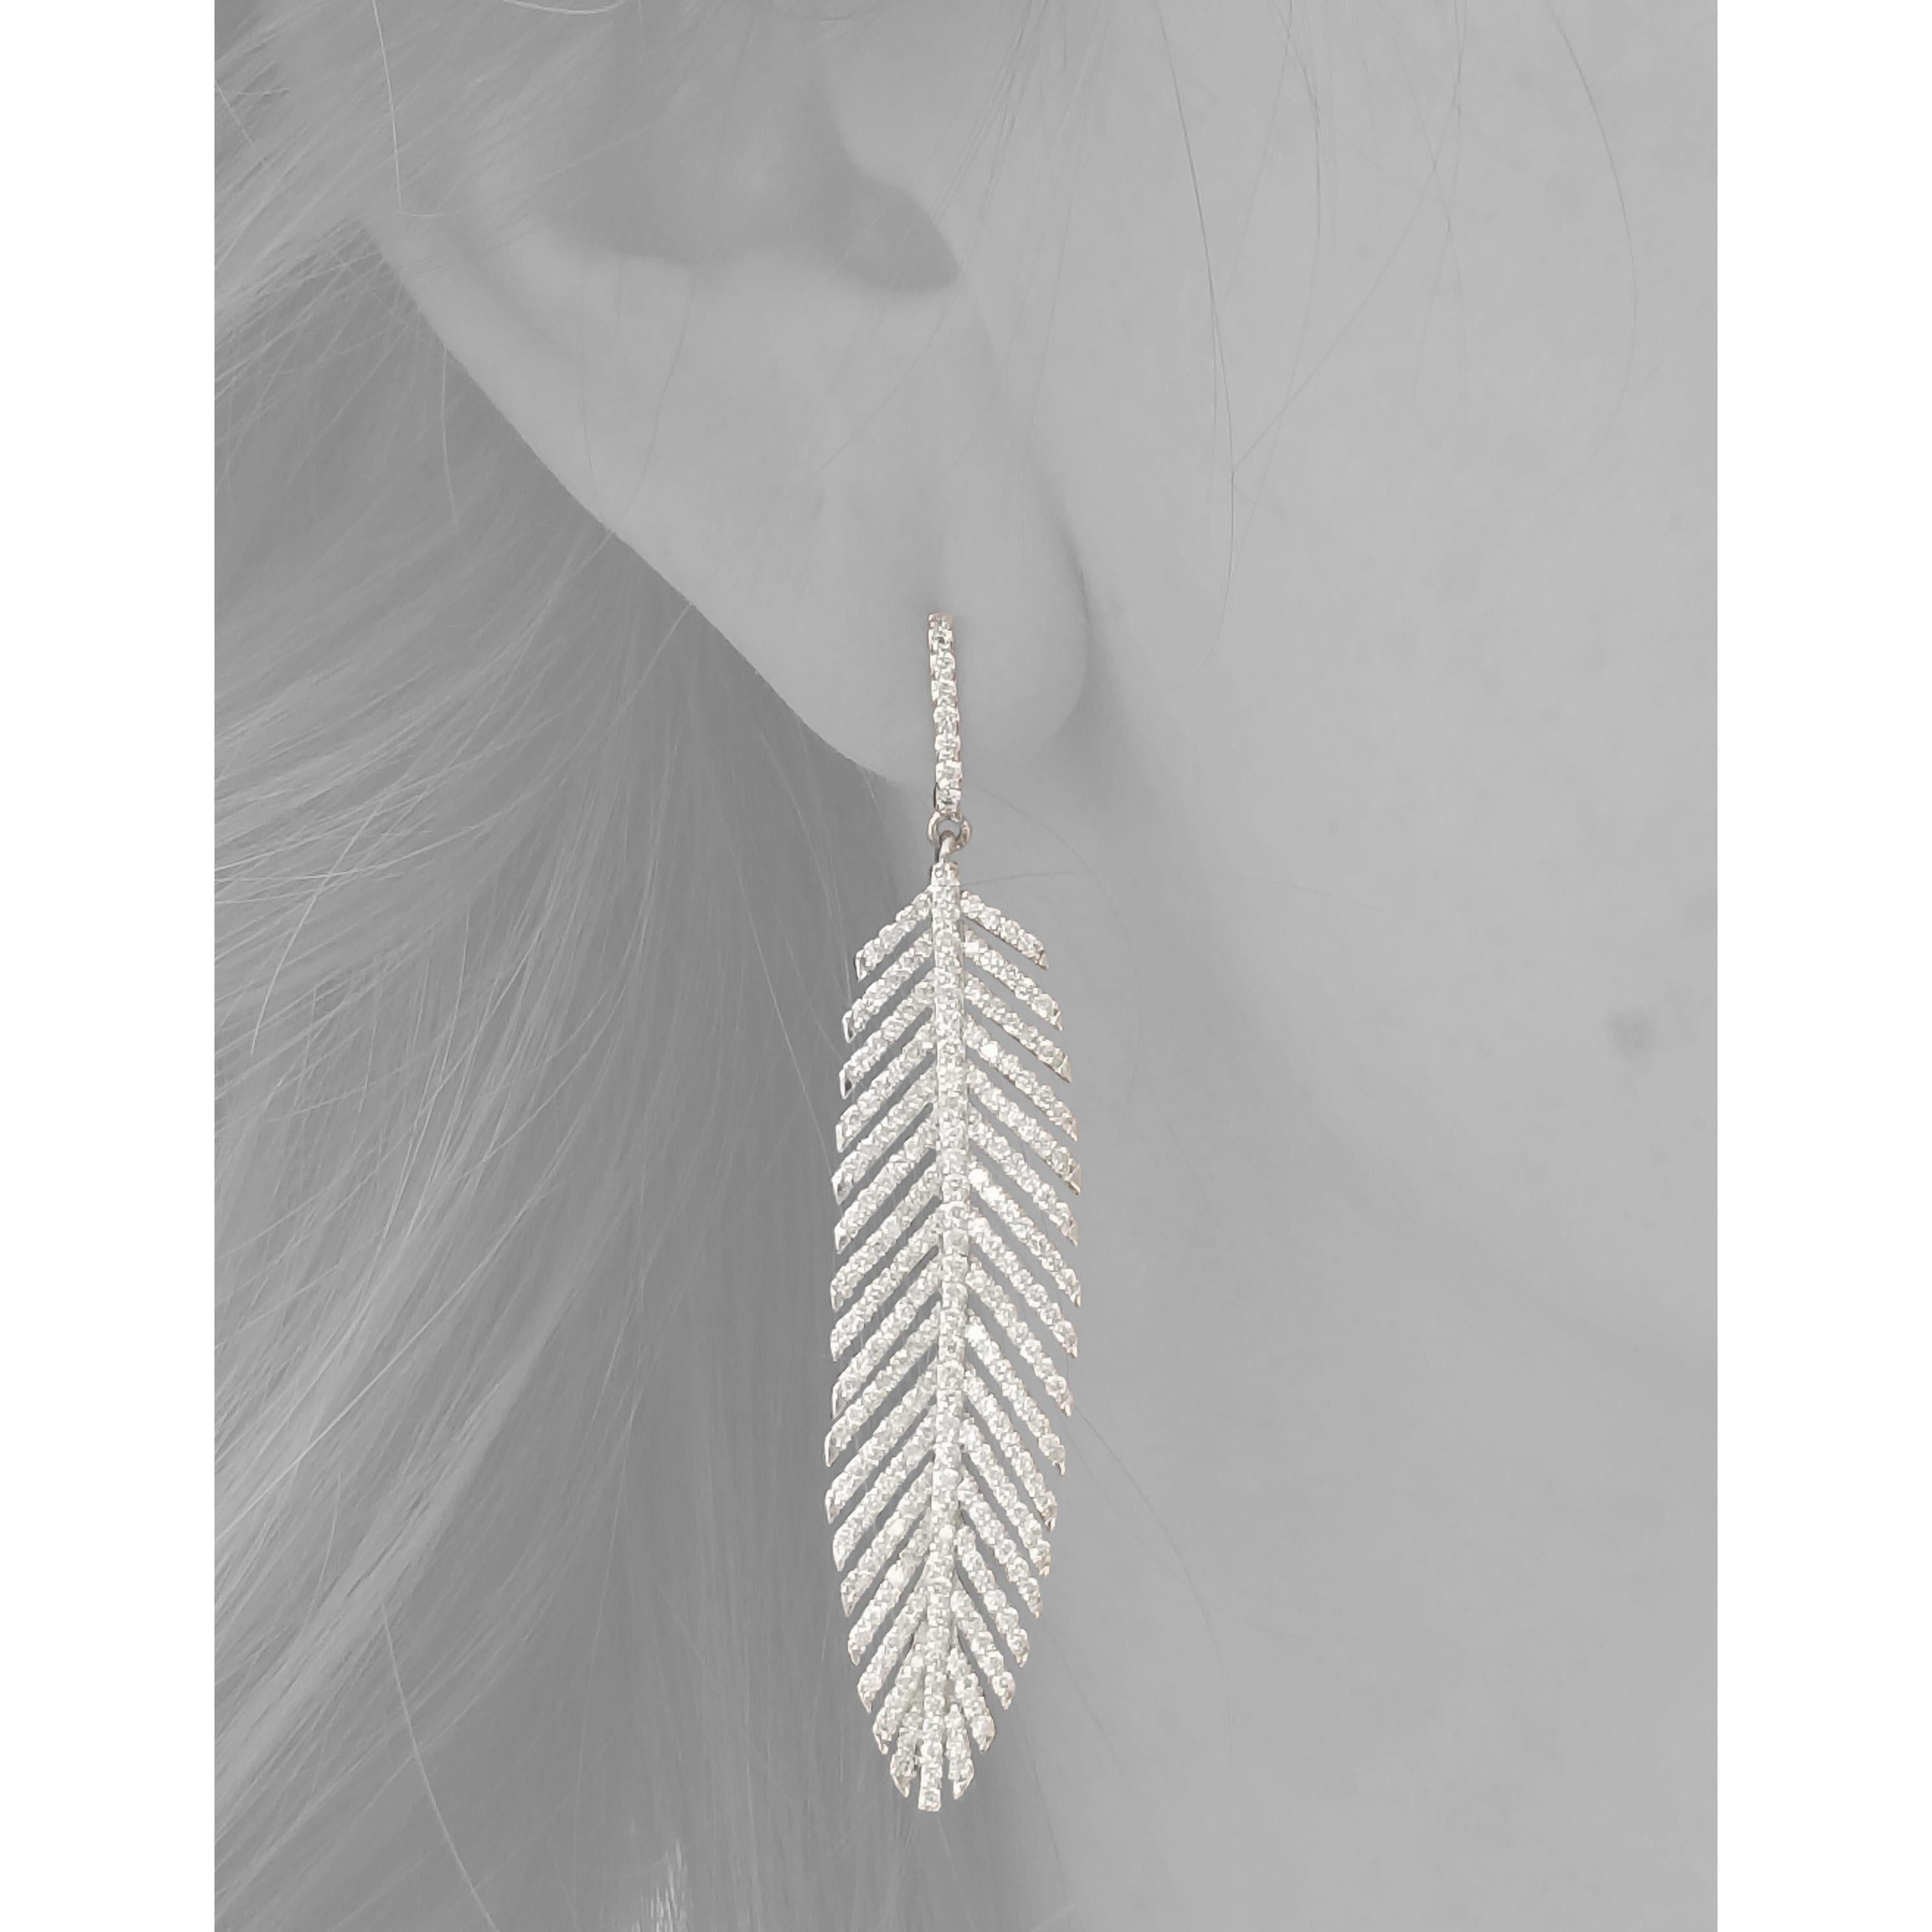 These exquisite platinum feather earrings are handset with gorgeous quality diamonds. The feathers move freely, adding playfulness to the graceful sophistication which they exude. The weight of the platinum is not overwhelming, as these were